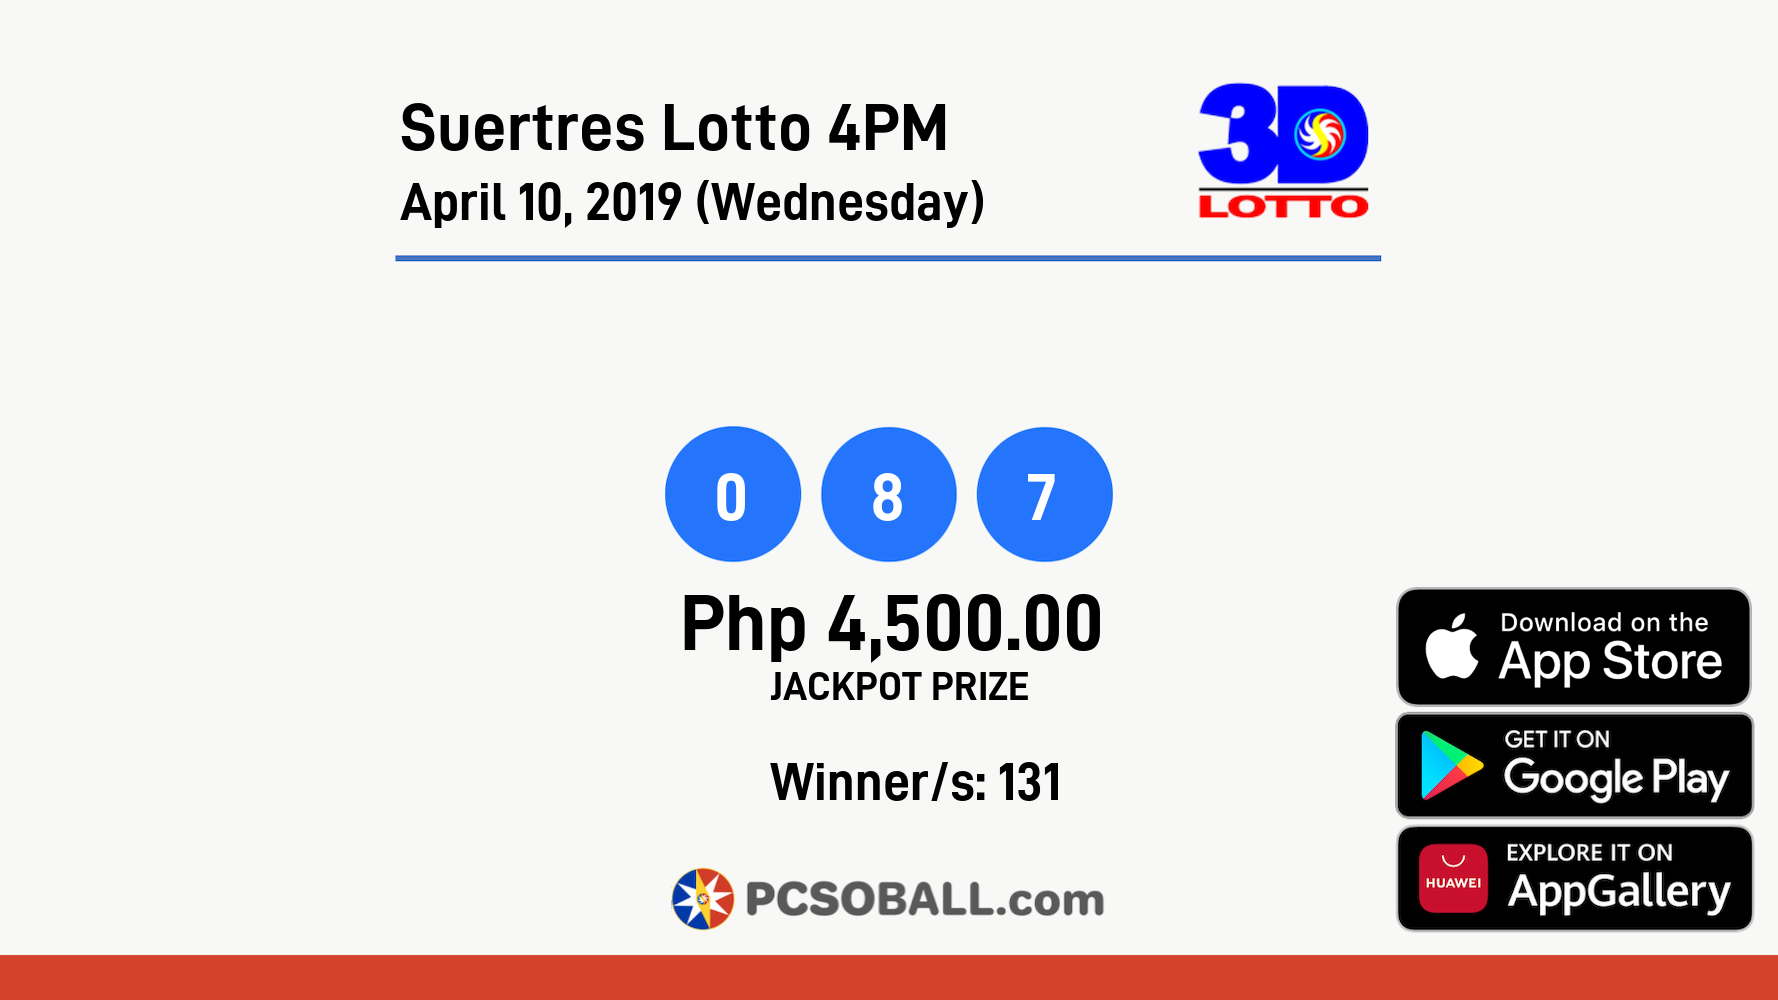 Suertres Lotto 4PM April 10, 2019 (Wednesday) Result